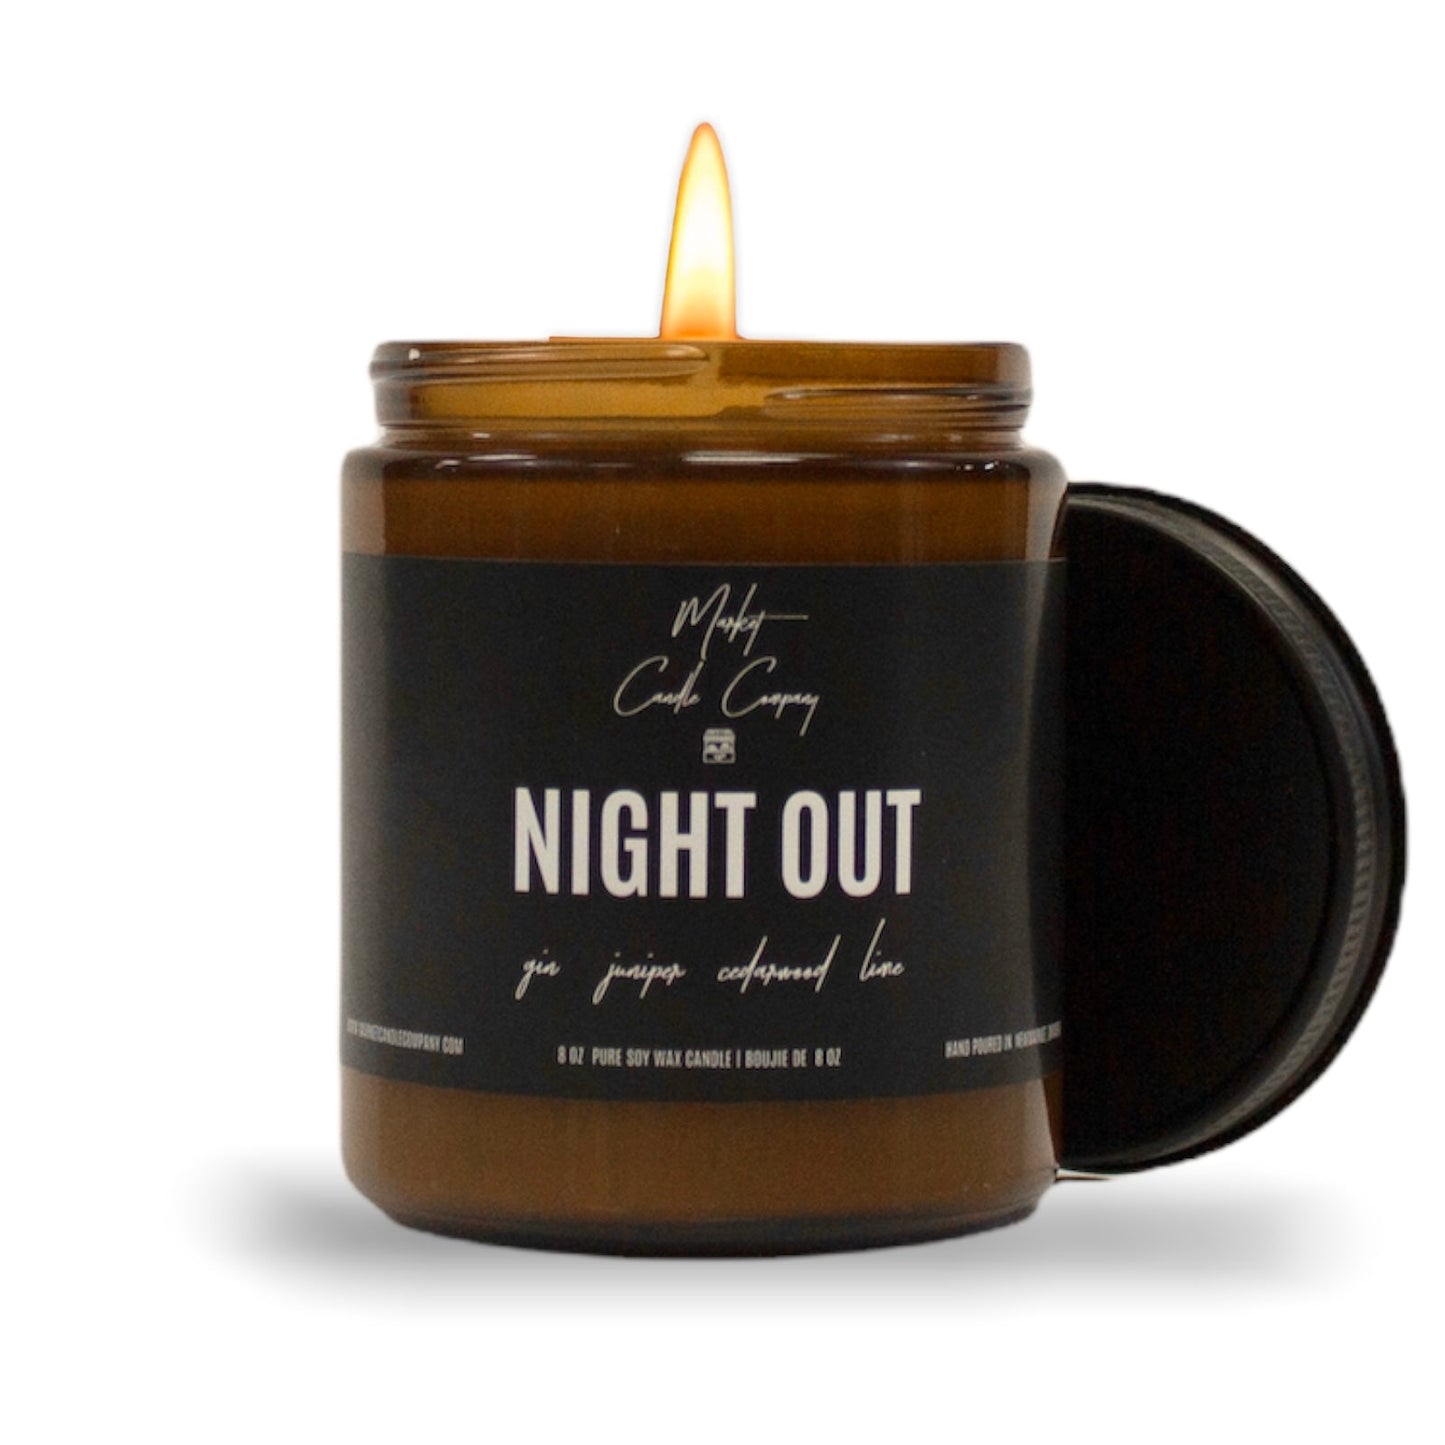 CANDLE (SOY WAX), NIGHT OUT 8 oz